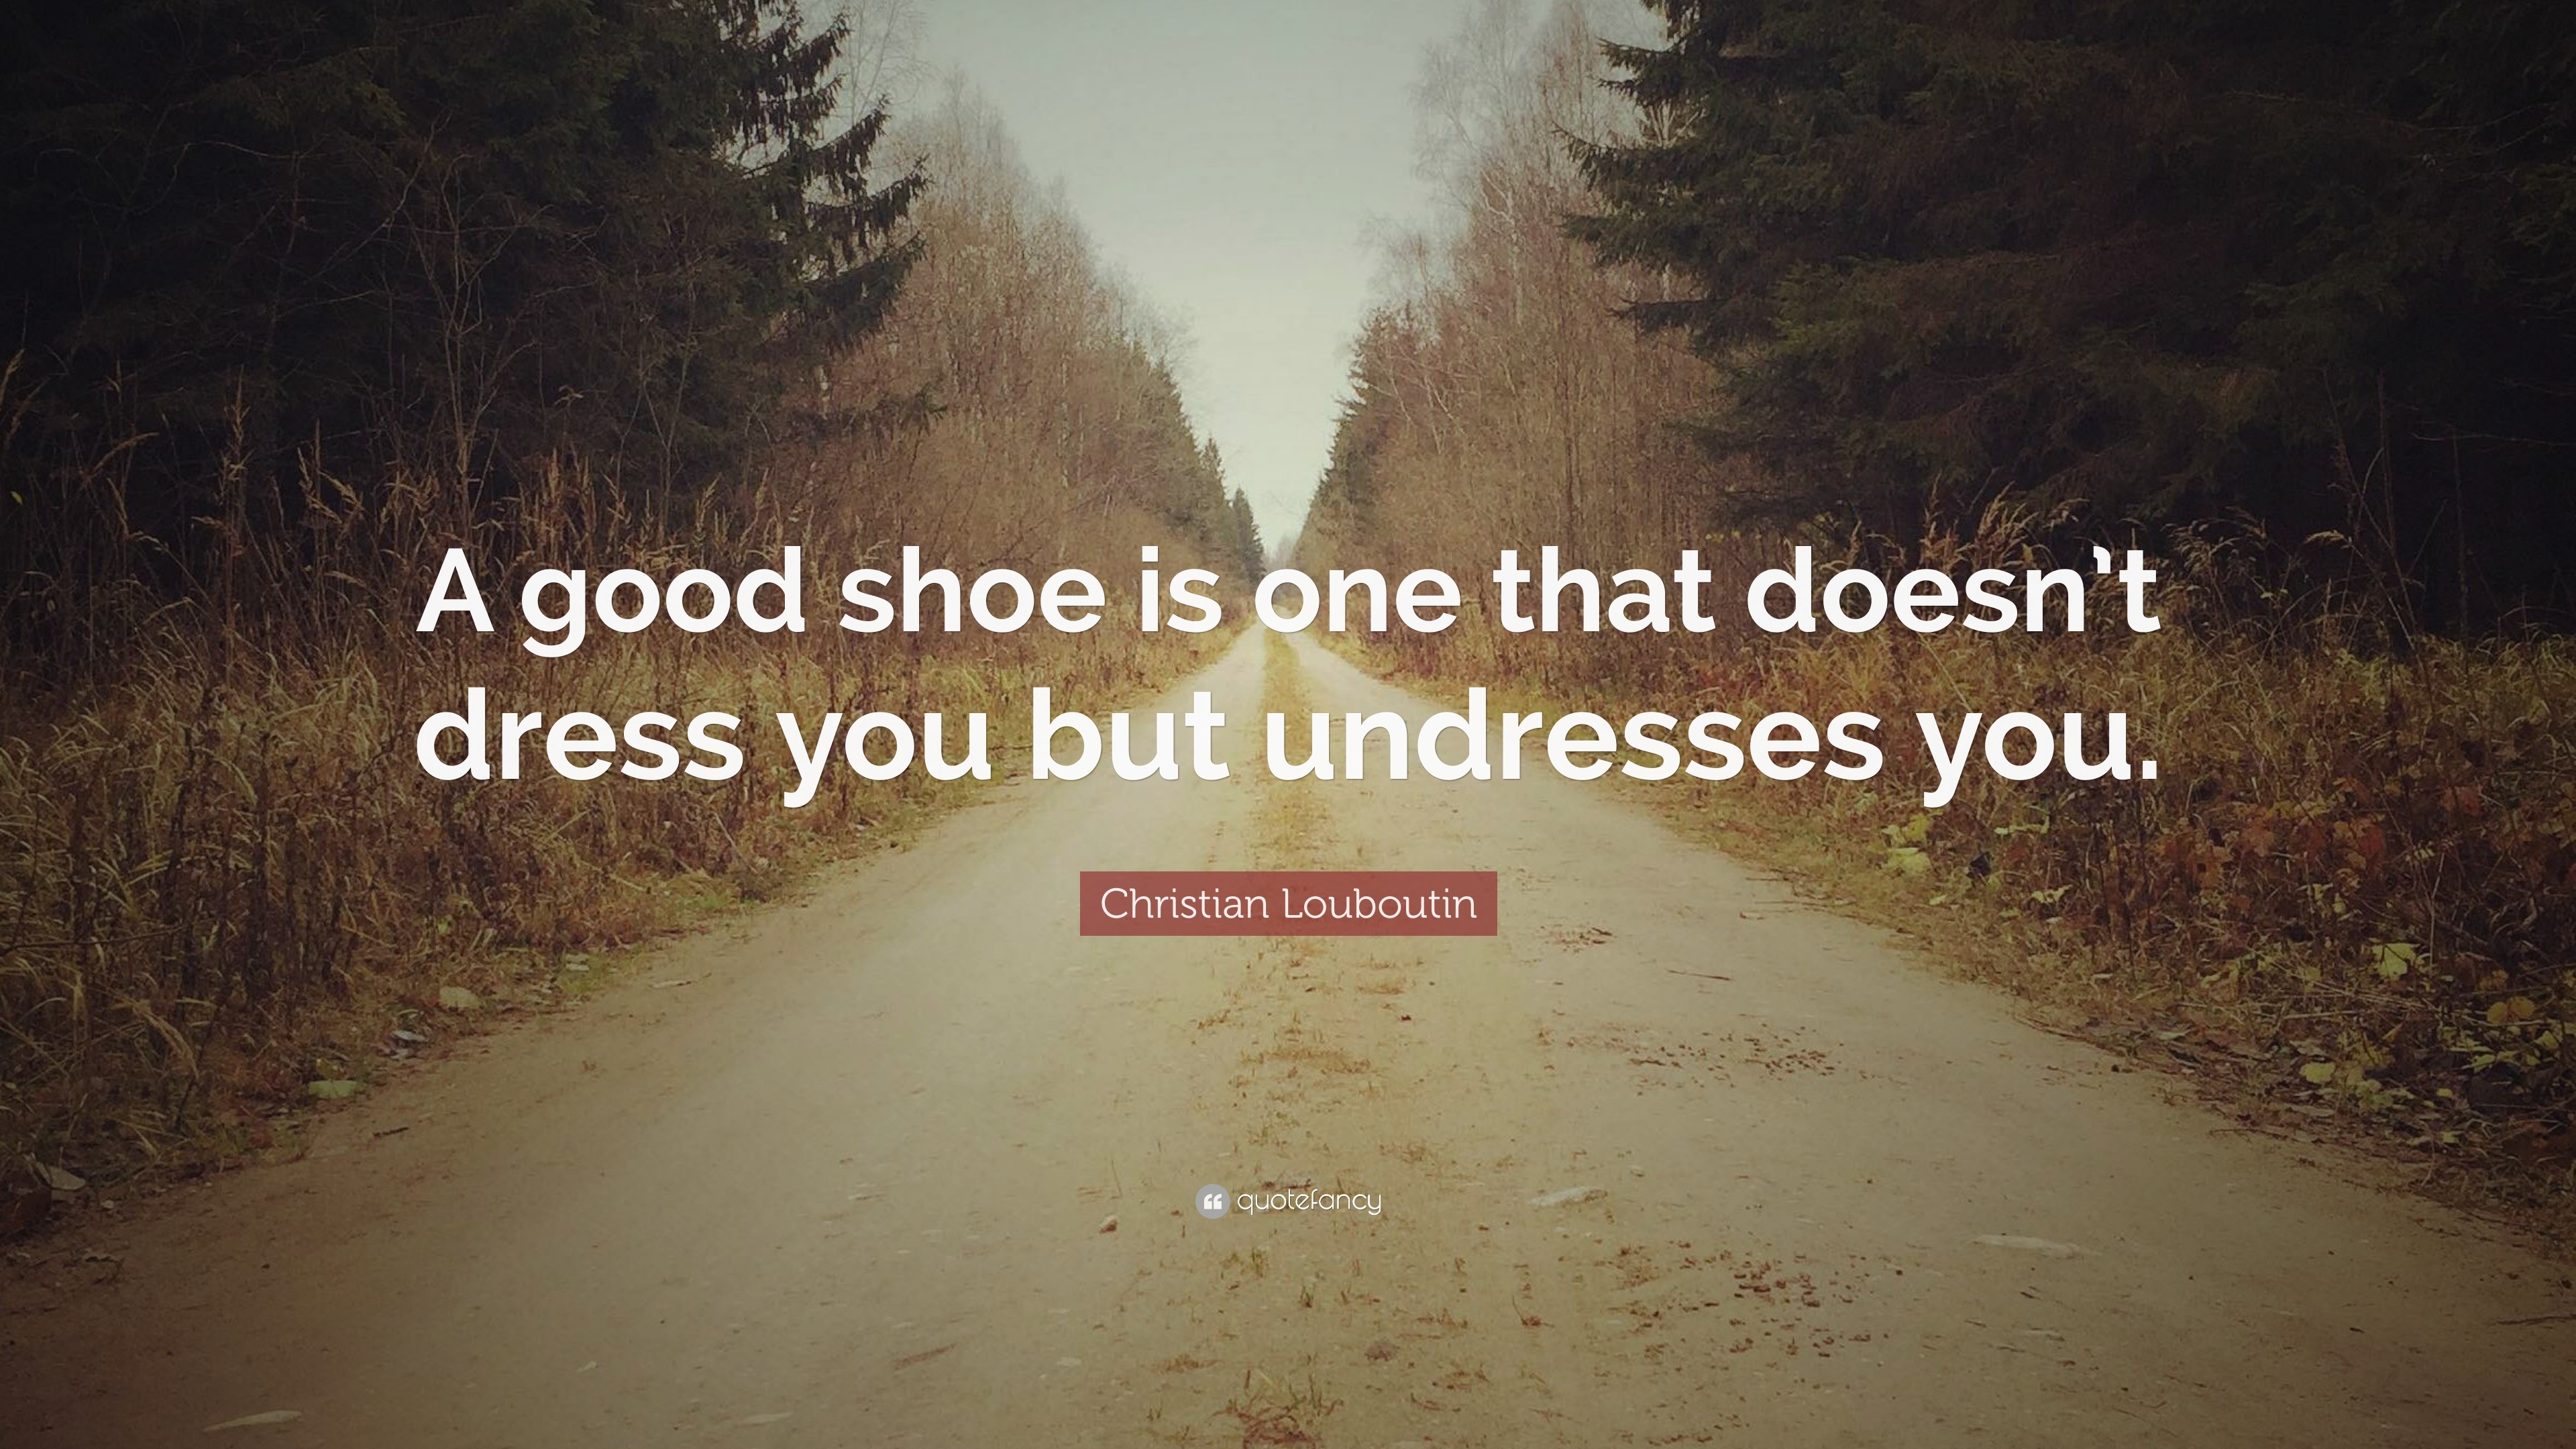 Christian Louboutin Quote: “A good shoe is that doesn't dress you but undresses you.”